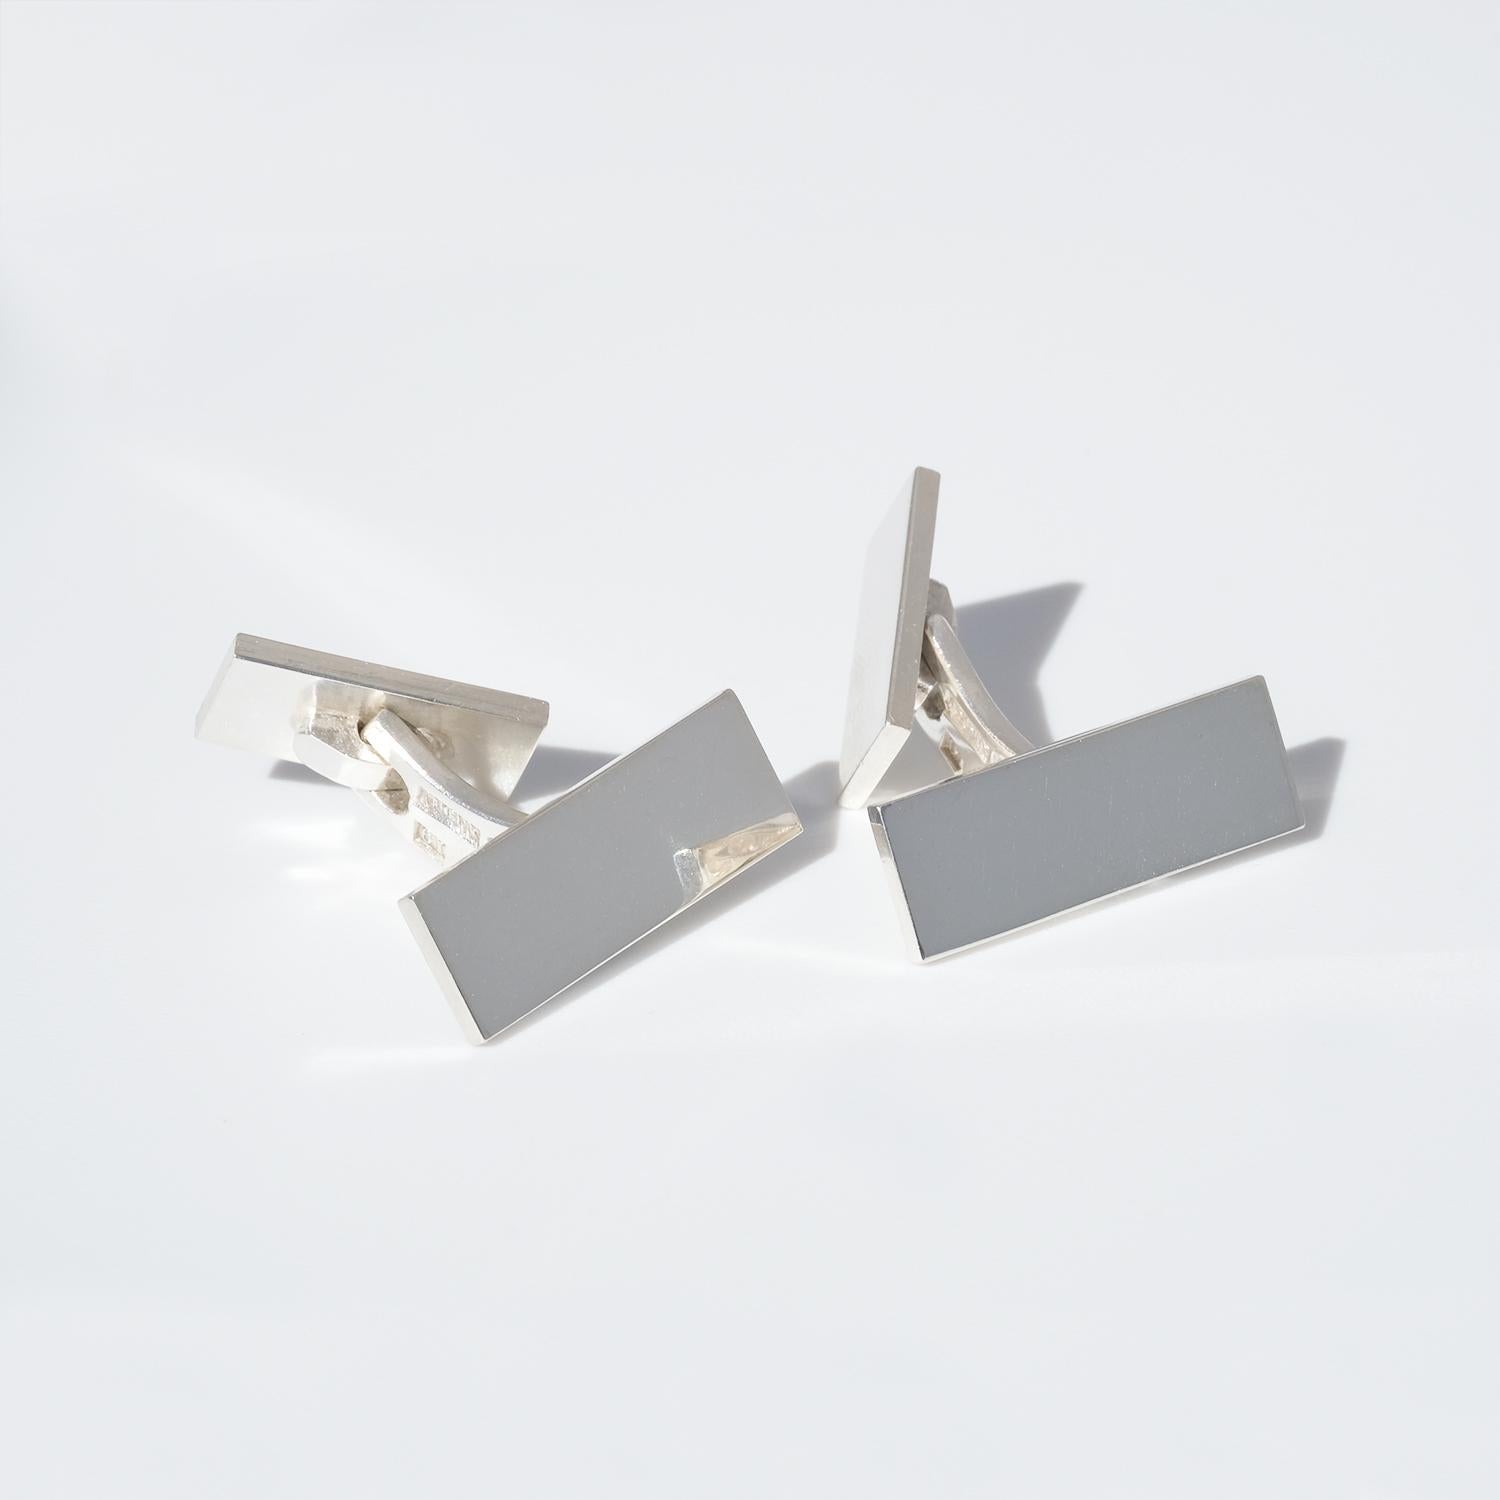 These sterling silver cufflinks have a rectangular shape and a polished surface. The shape of the cufflinks are classic and their appearance can be described as simple but yet sophisticated.

A set of cufflinks like this are suitable for both the